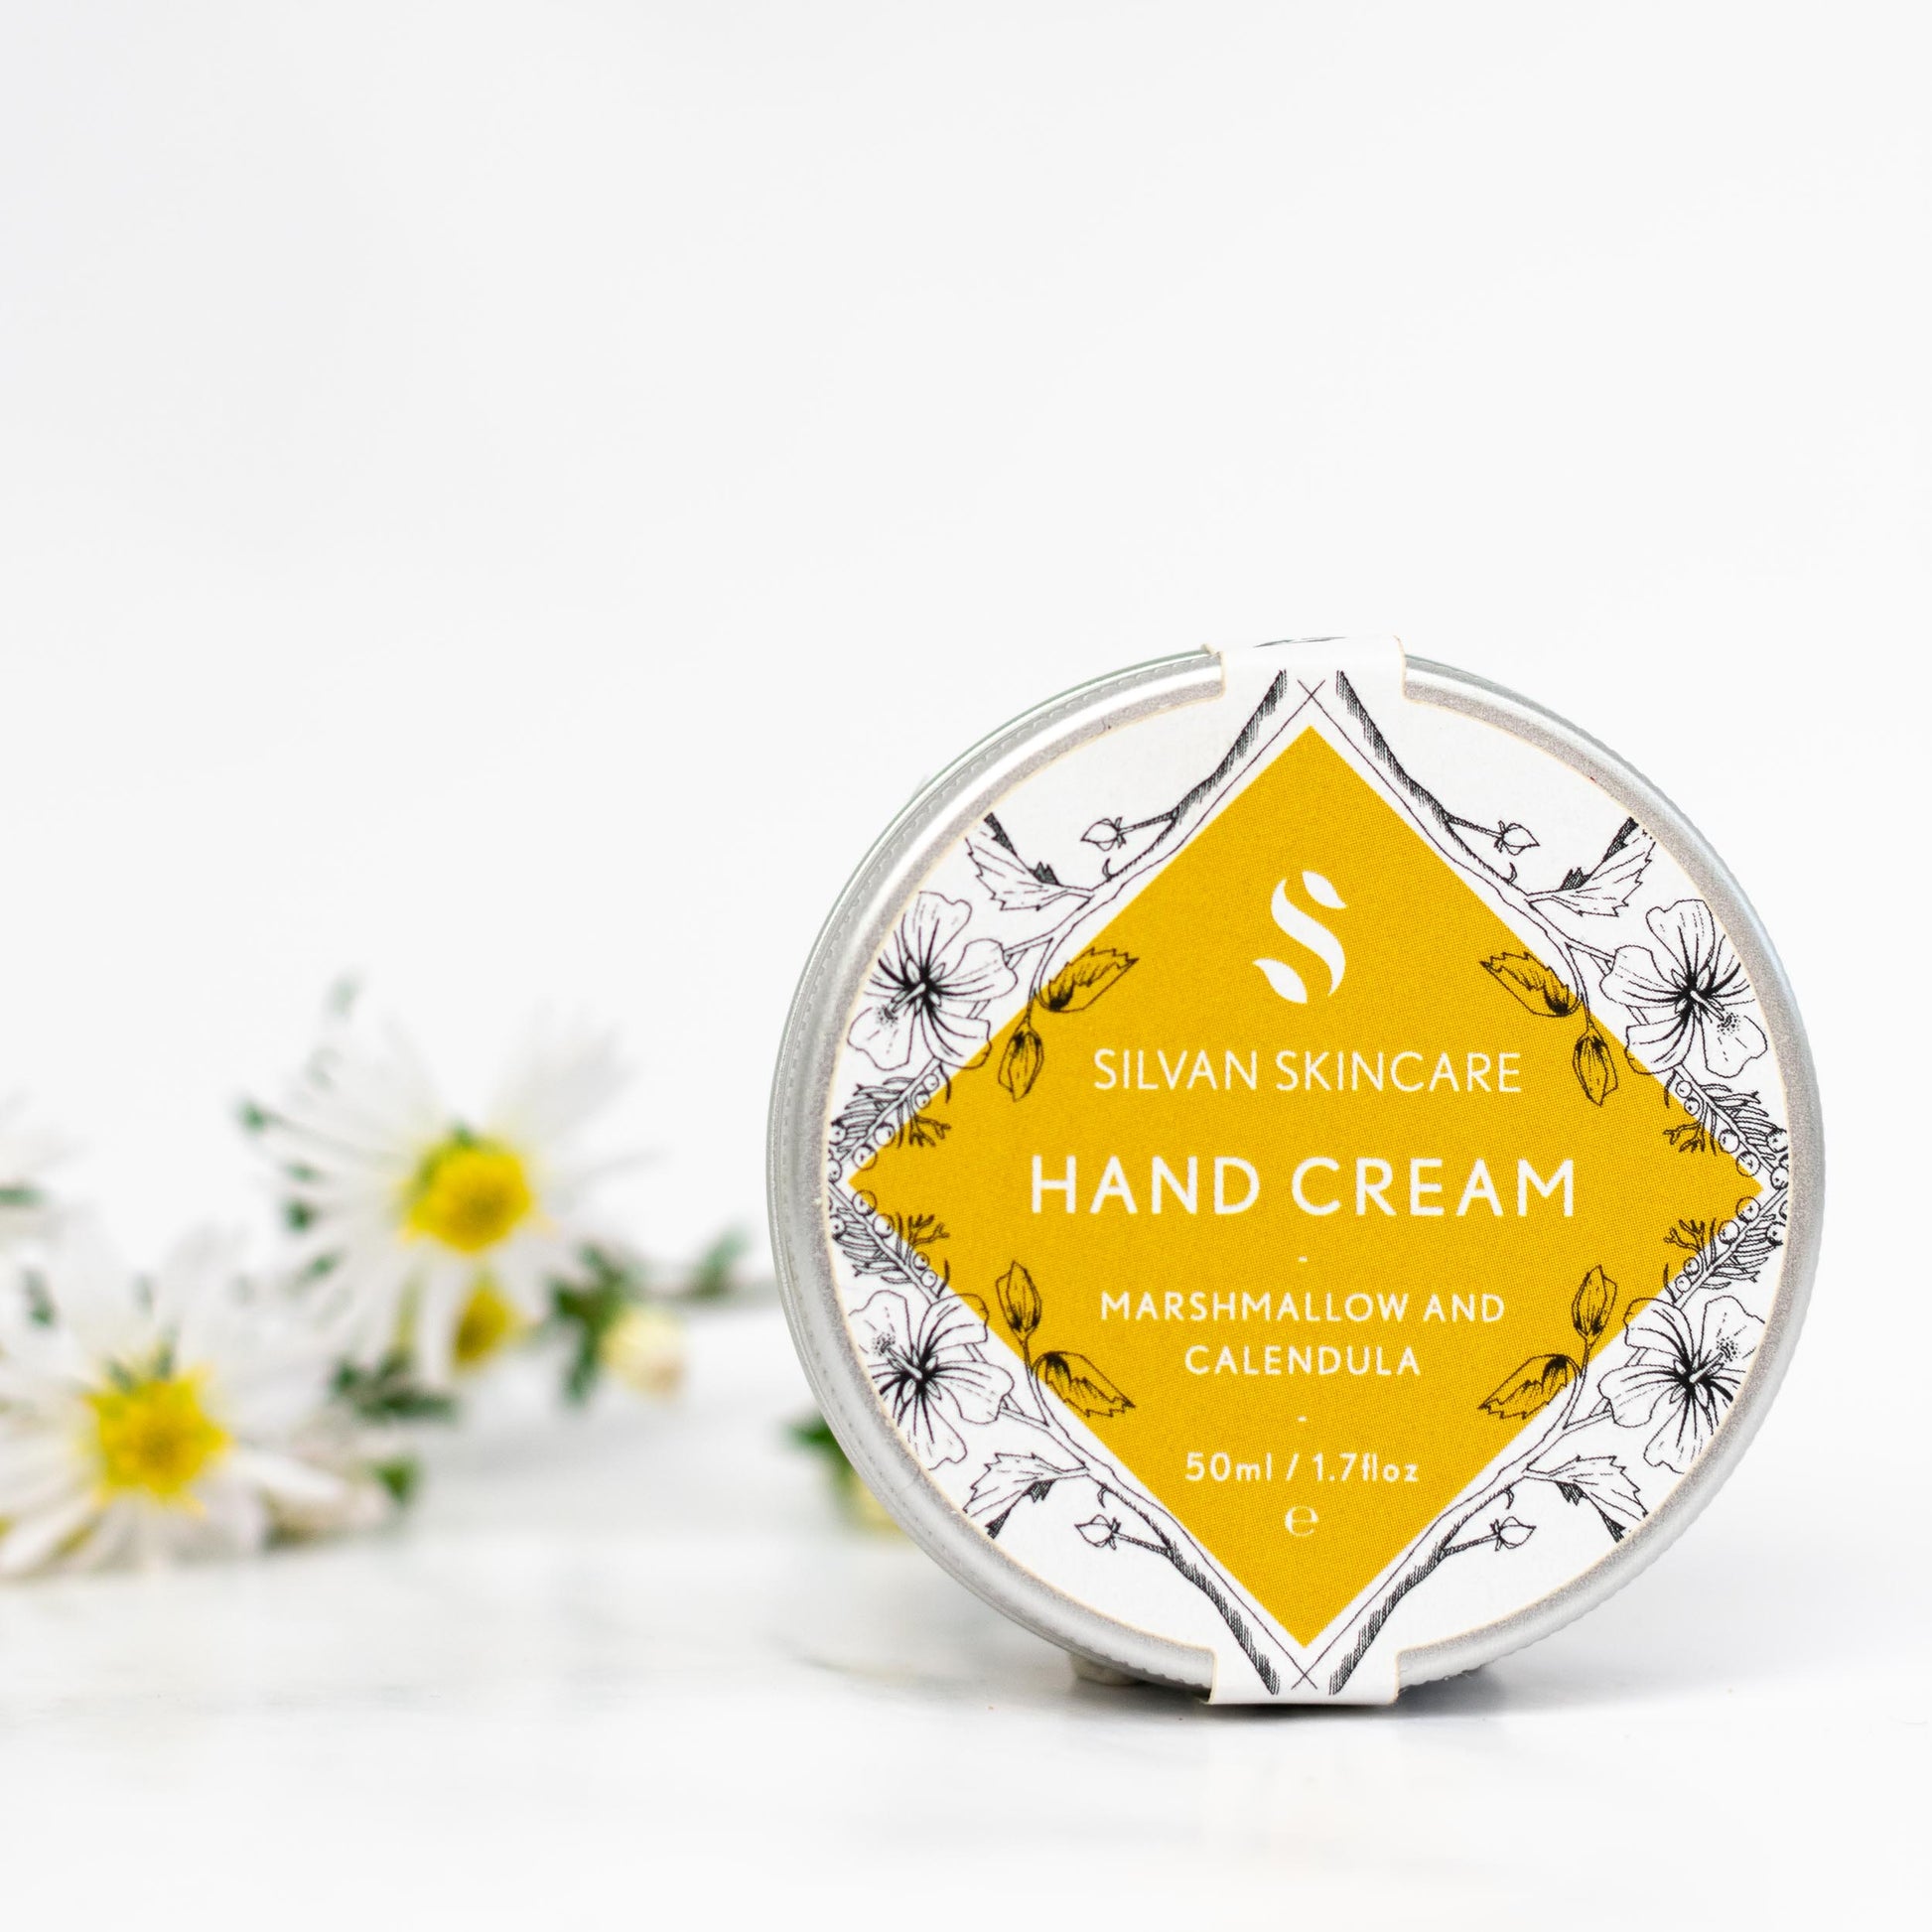 silvan skincare hand cream on a white background with some daisy-like calendula flowers blurred in the background. the hand cream is in an aluminium pot with a white and yellow labels which reads: silvan skincare hand cream marshmallow and calendula 50ml